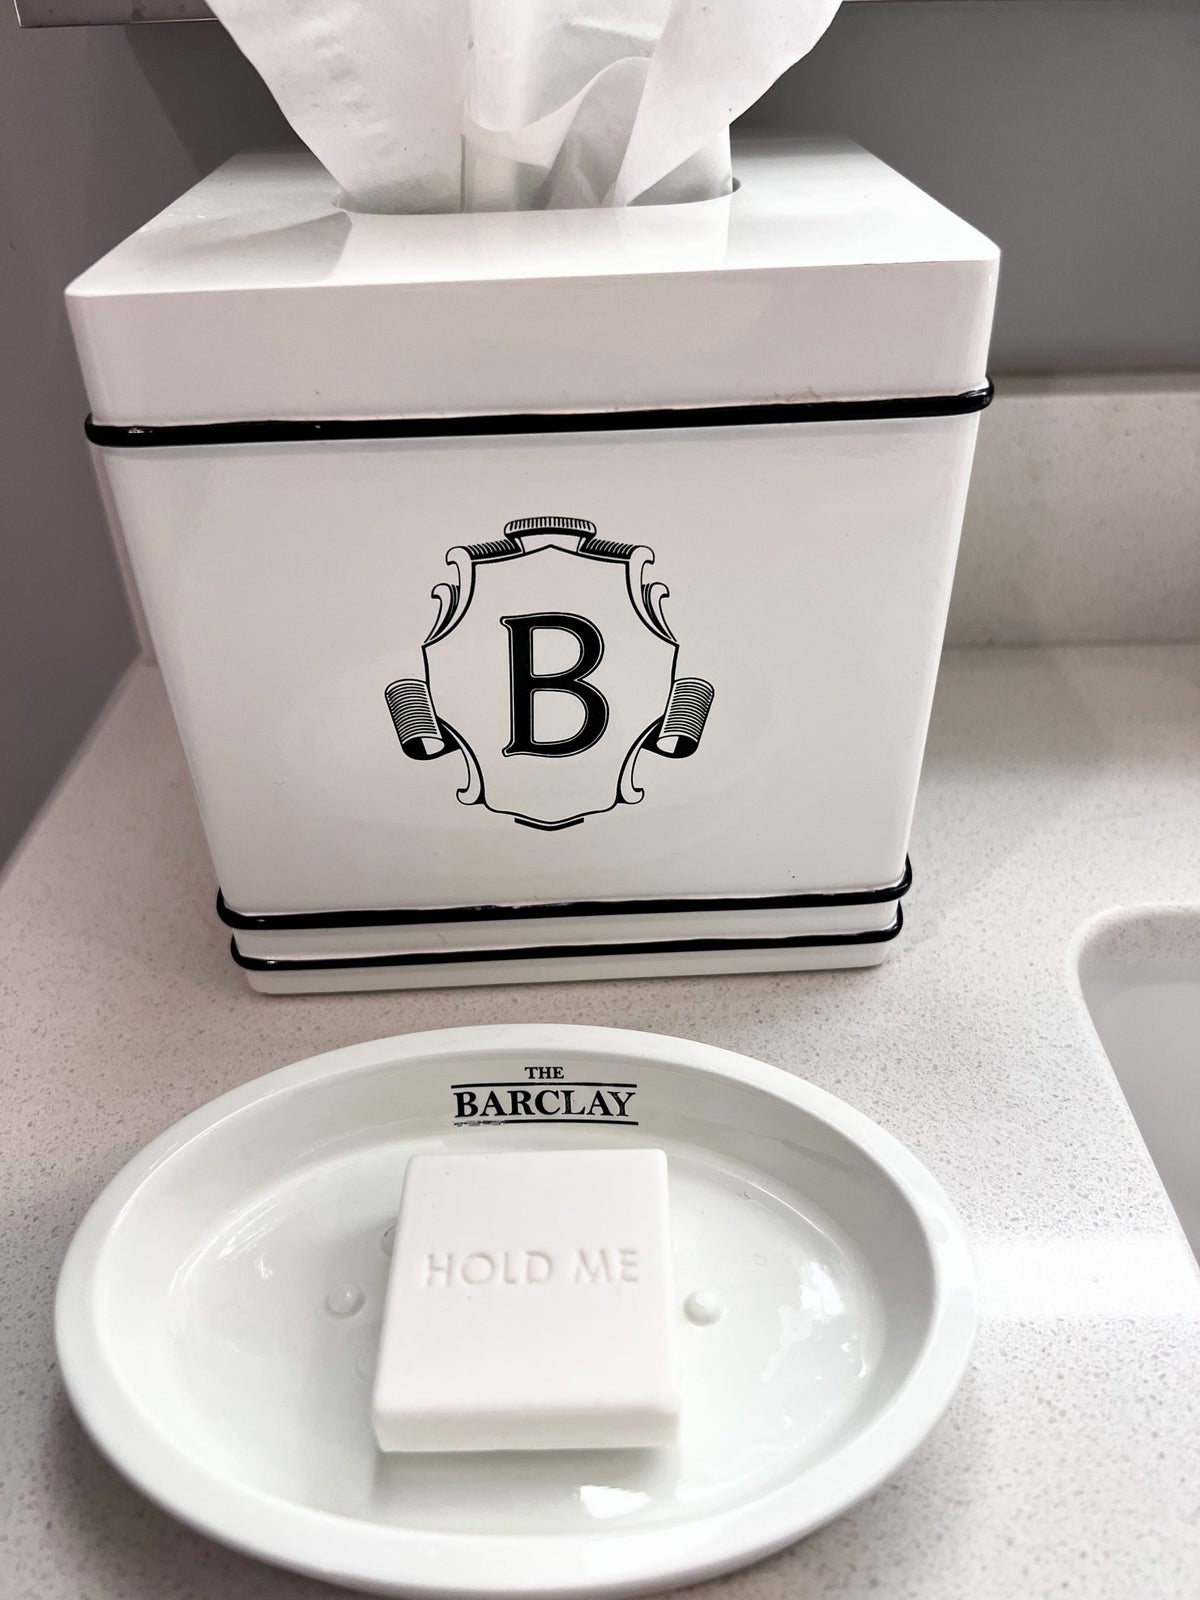 Intercontinental New York Barclay bathroom tissues and soap